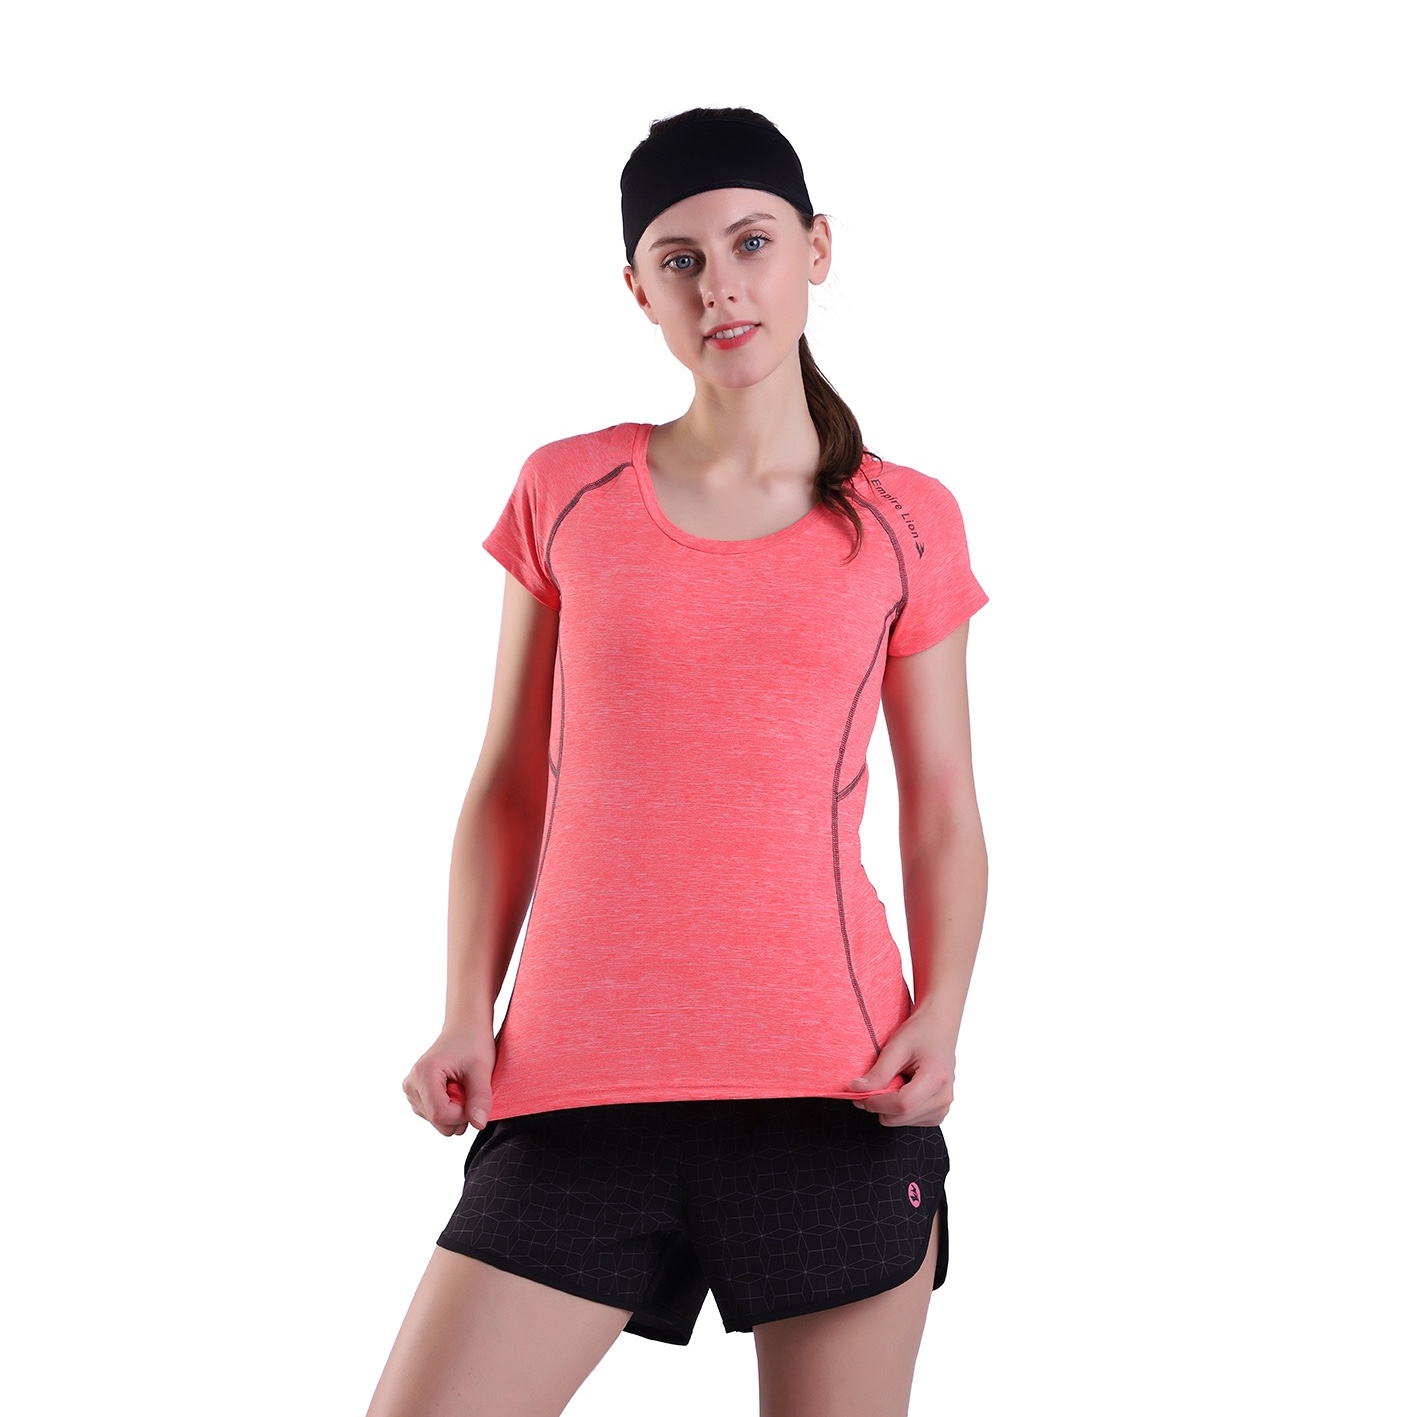 Women Quick Dry Fit Sweat Shirt T-Shirt Sports Workout Athletic Fitness Running Tops